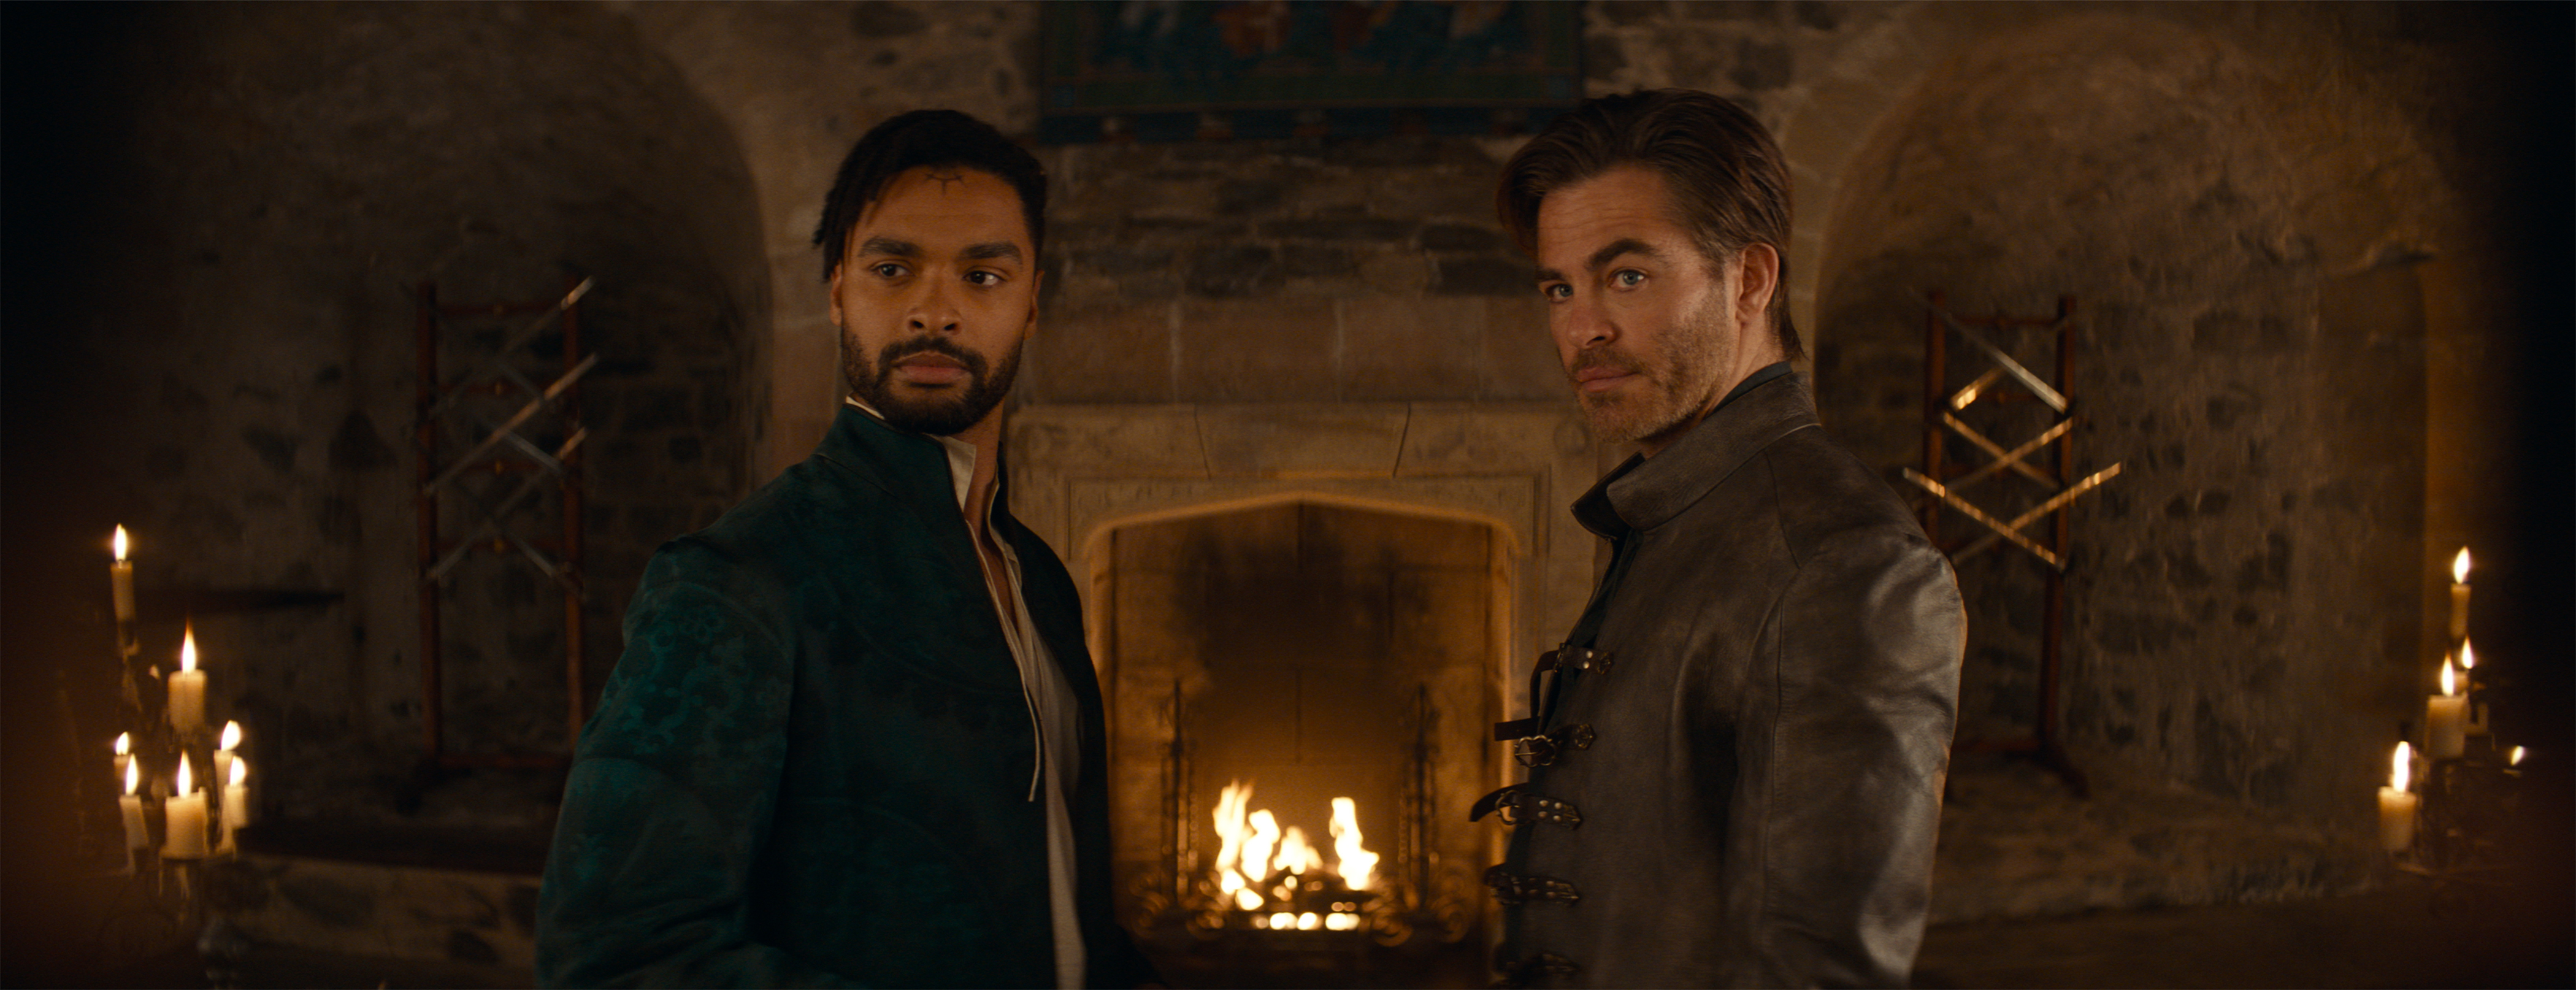 Rege-Jean Page plays Xenk and Chris Pine plays Edgin in 'Dungeons & Dragons: Honor Among Thieves'. Image: Paramount Pictures / eOne / Supplied